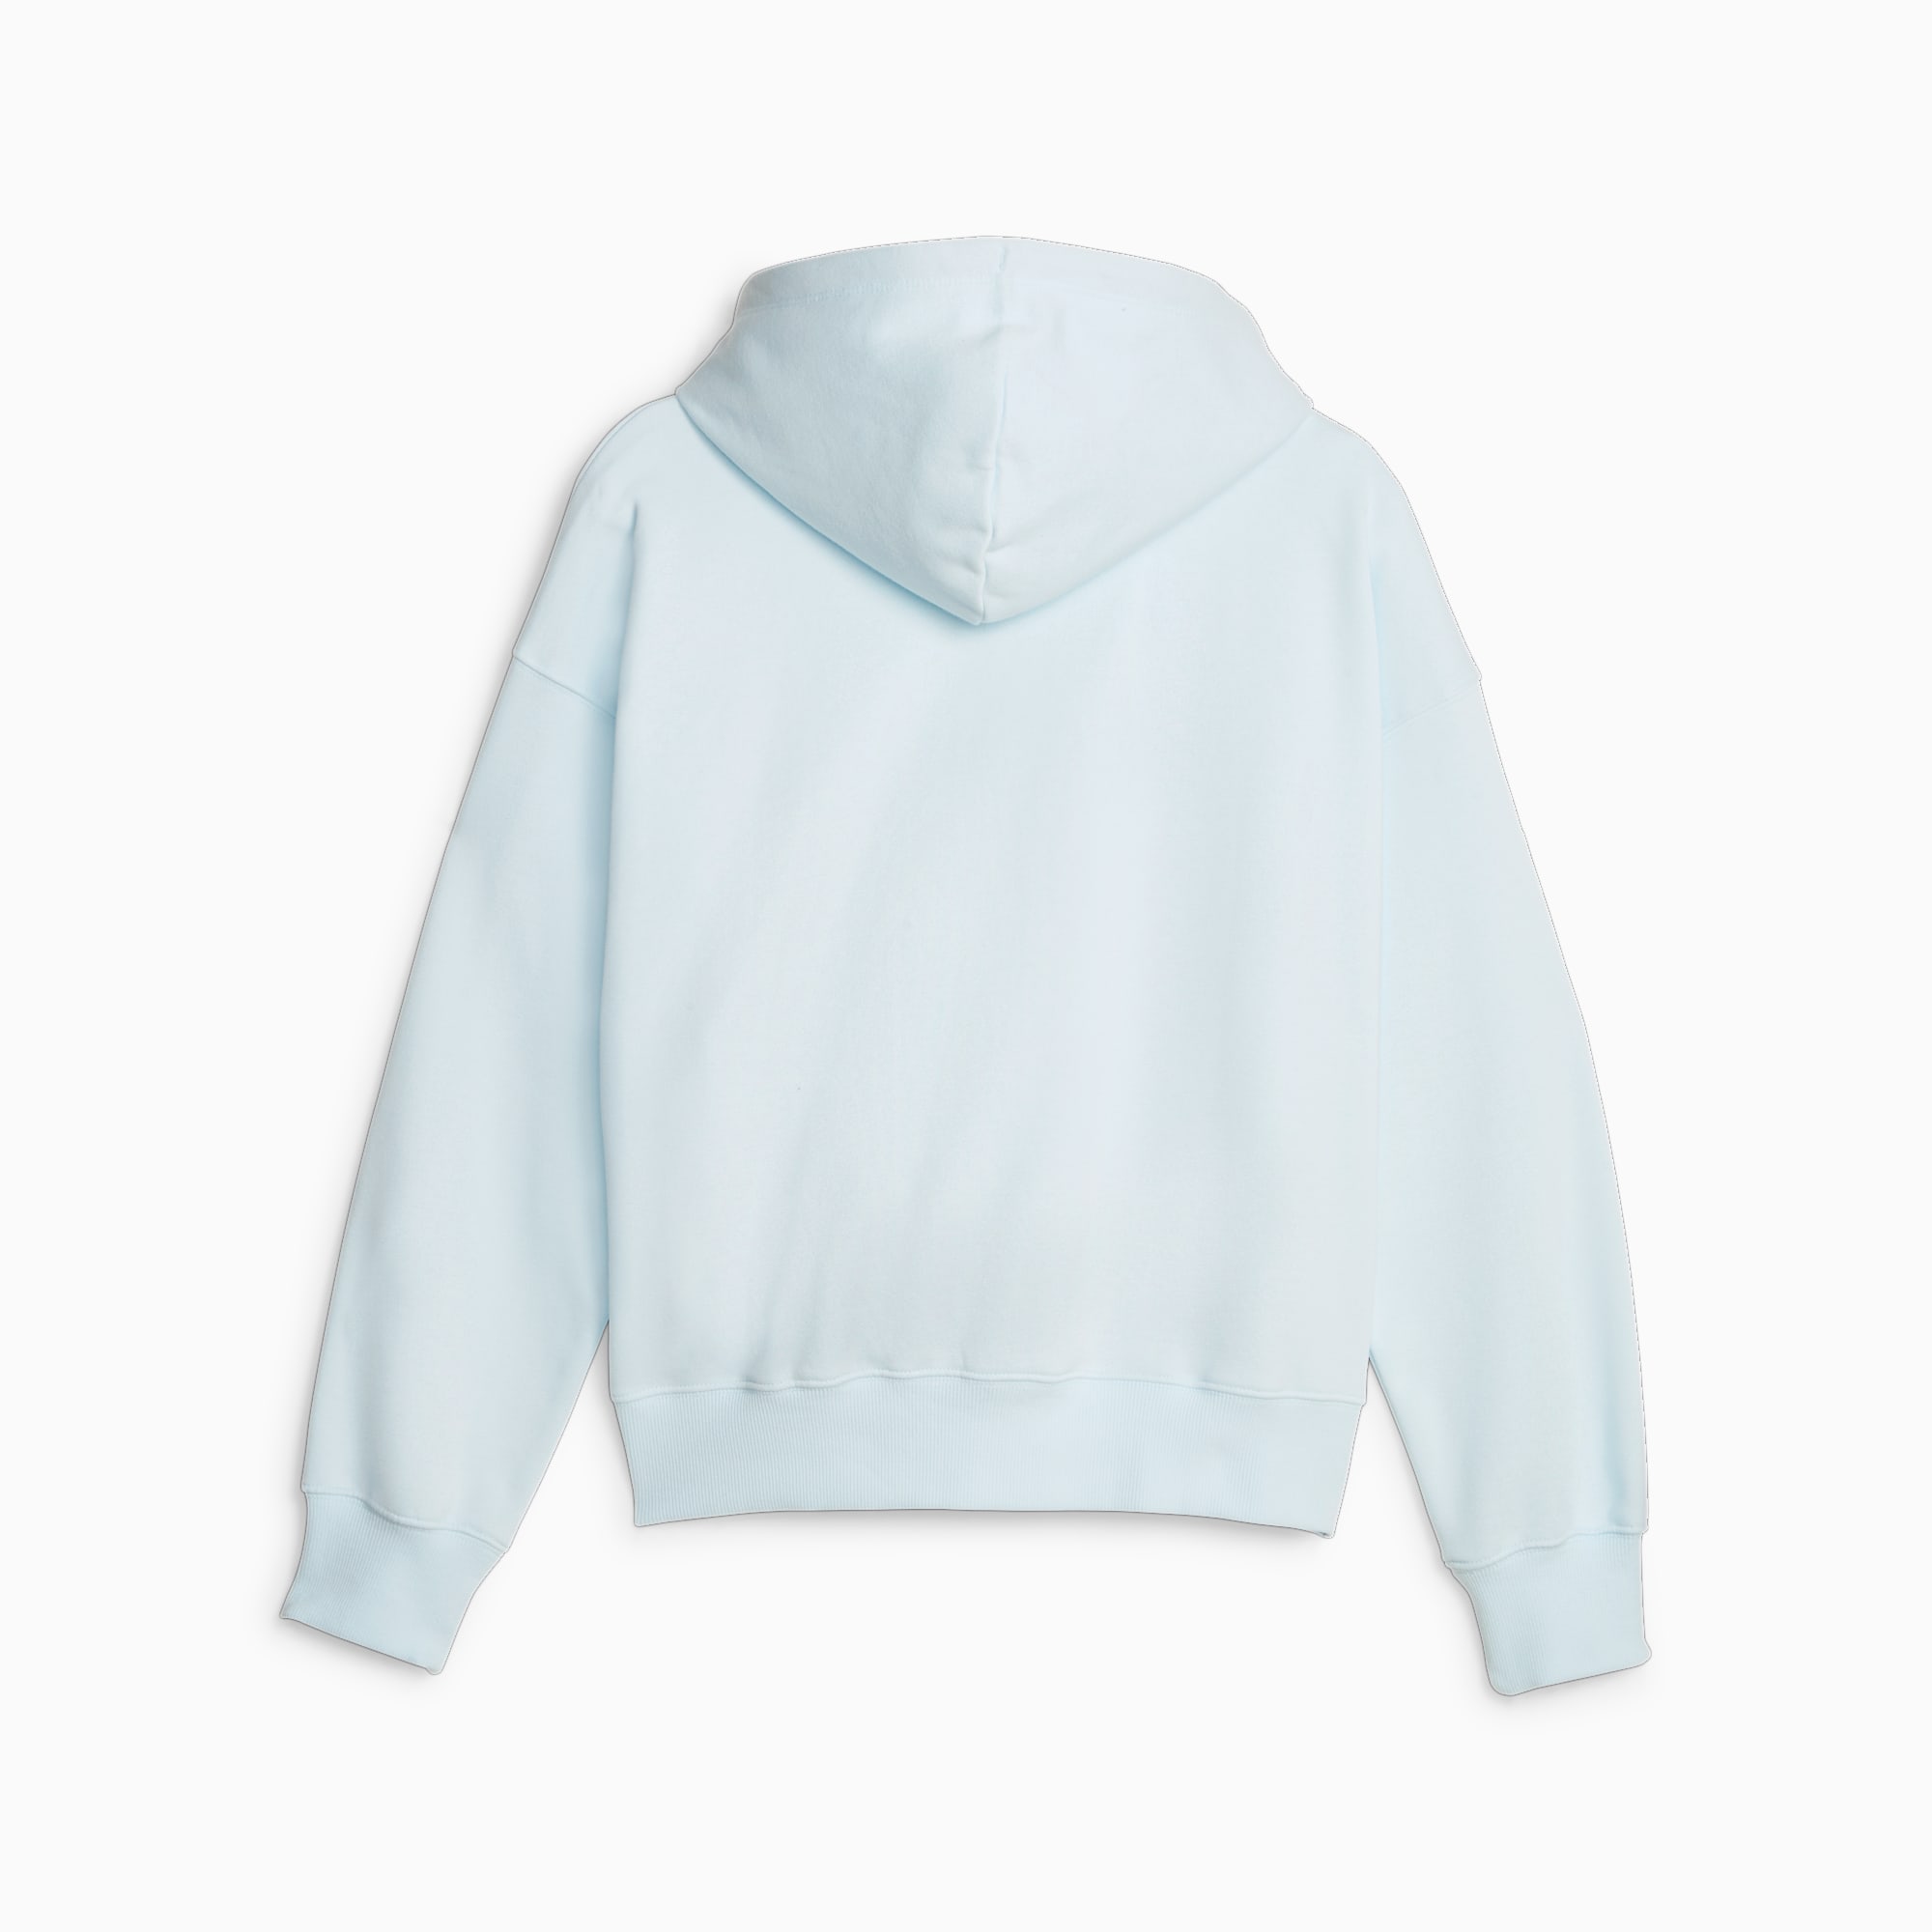 PUMA Classics Women's Oversized Hoodie, Icy Blue, Size S, Clothing